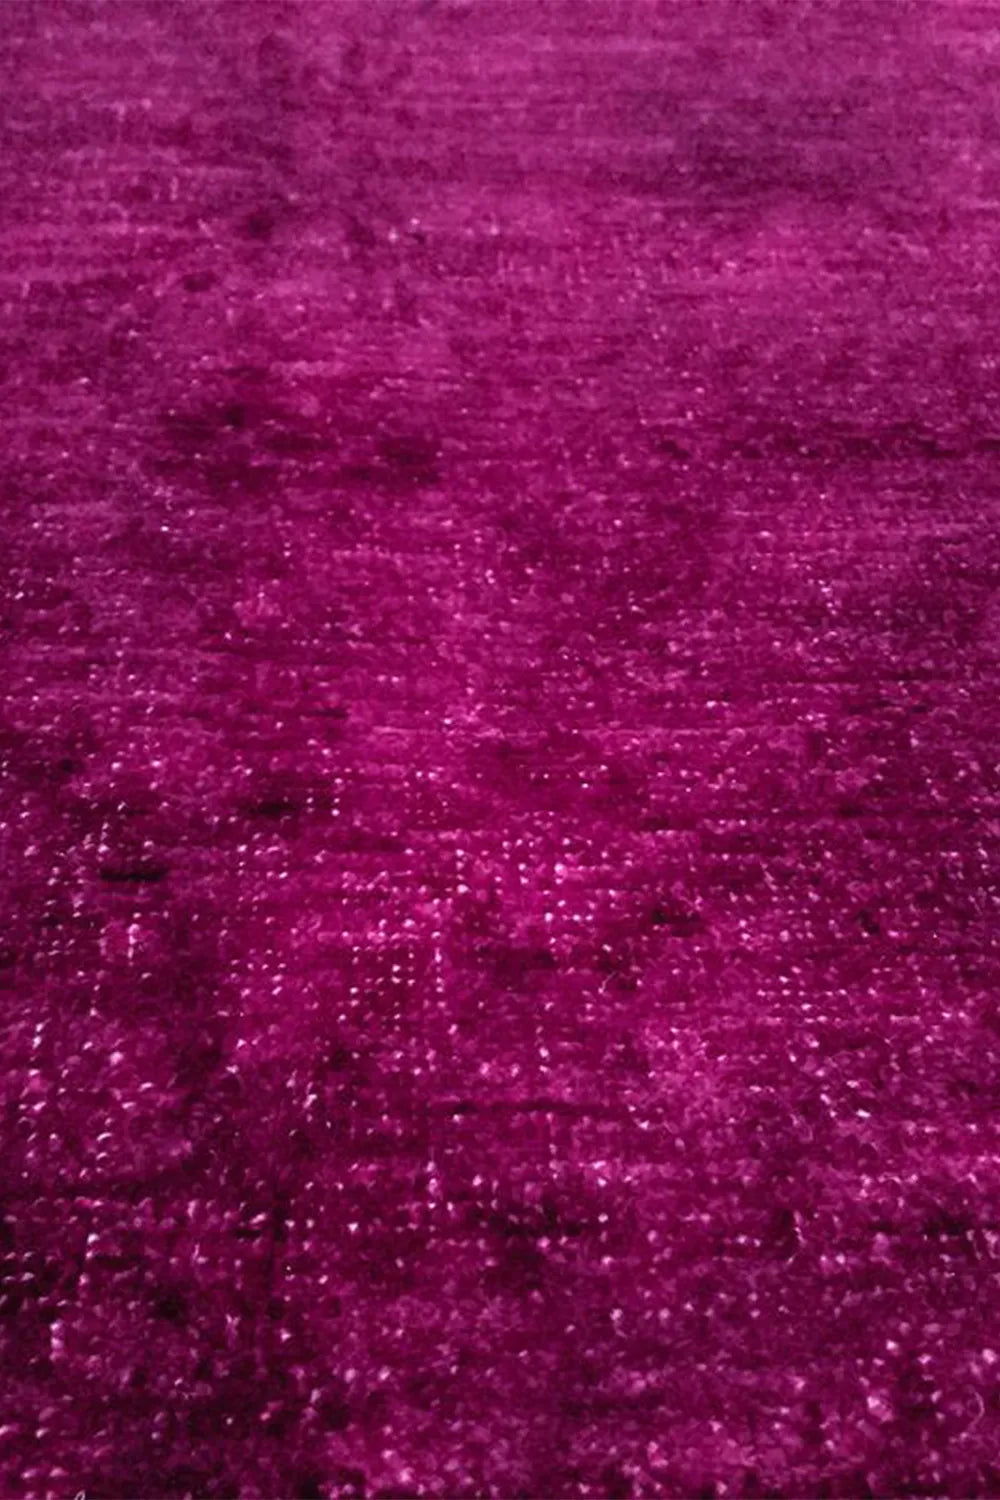 Luxury Pink Wool Area Rug, bringing warmth and vibrancy to your living space.